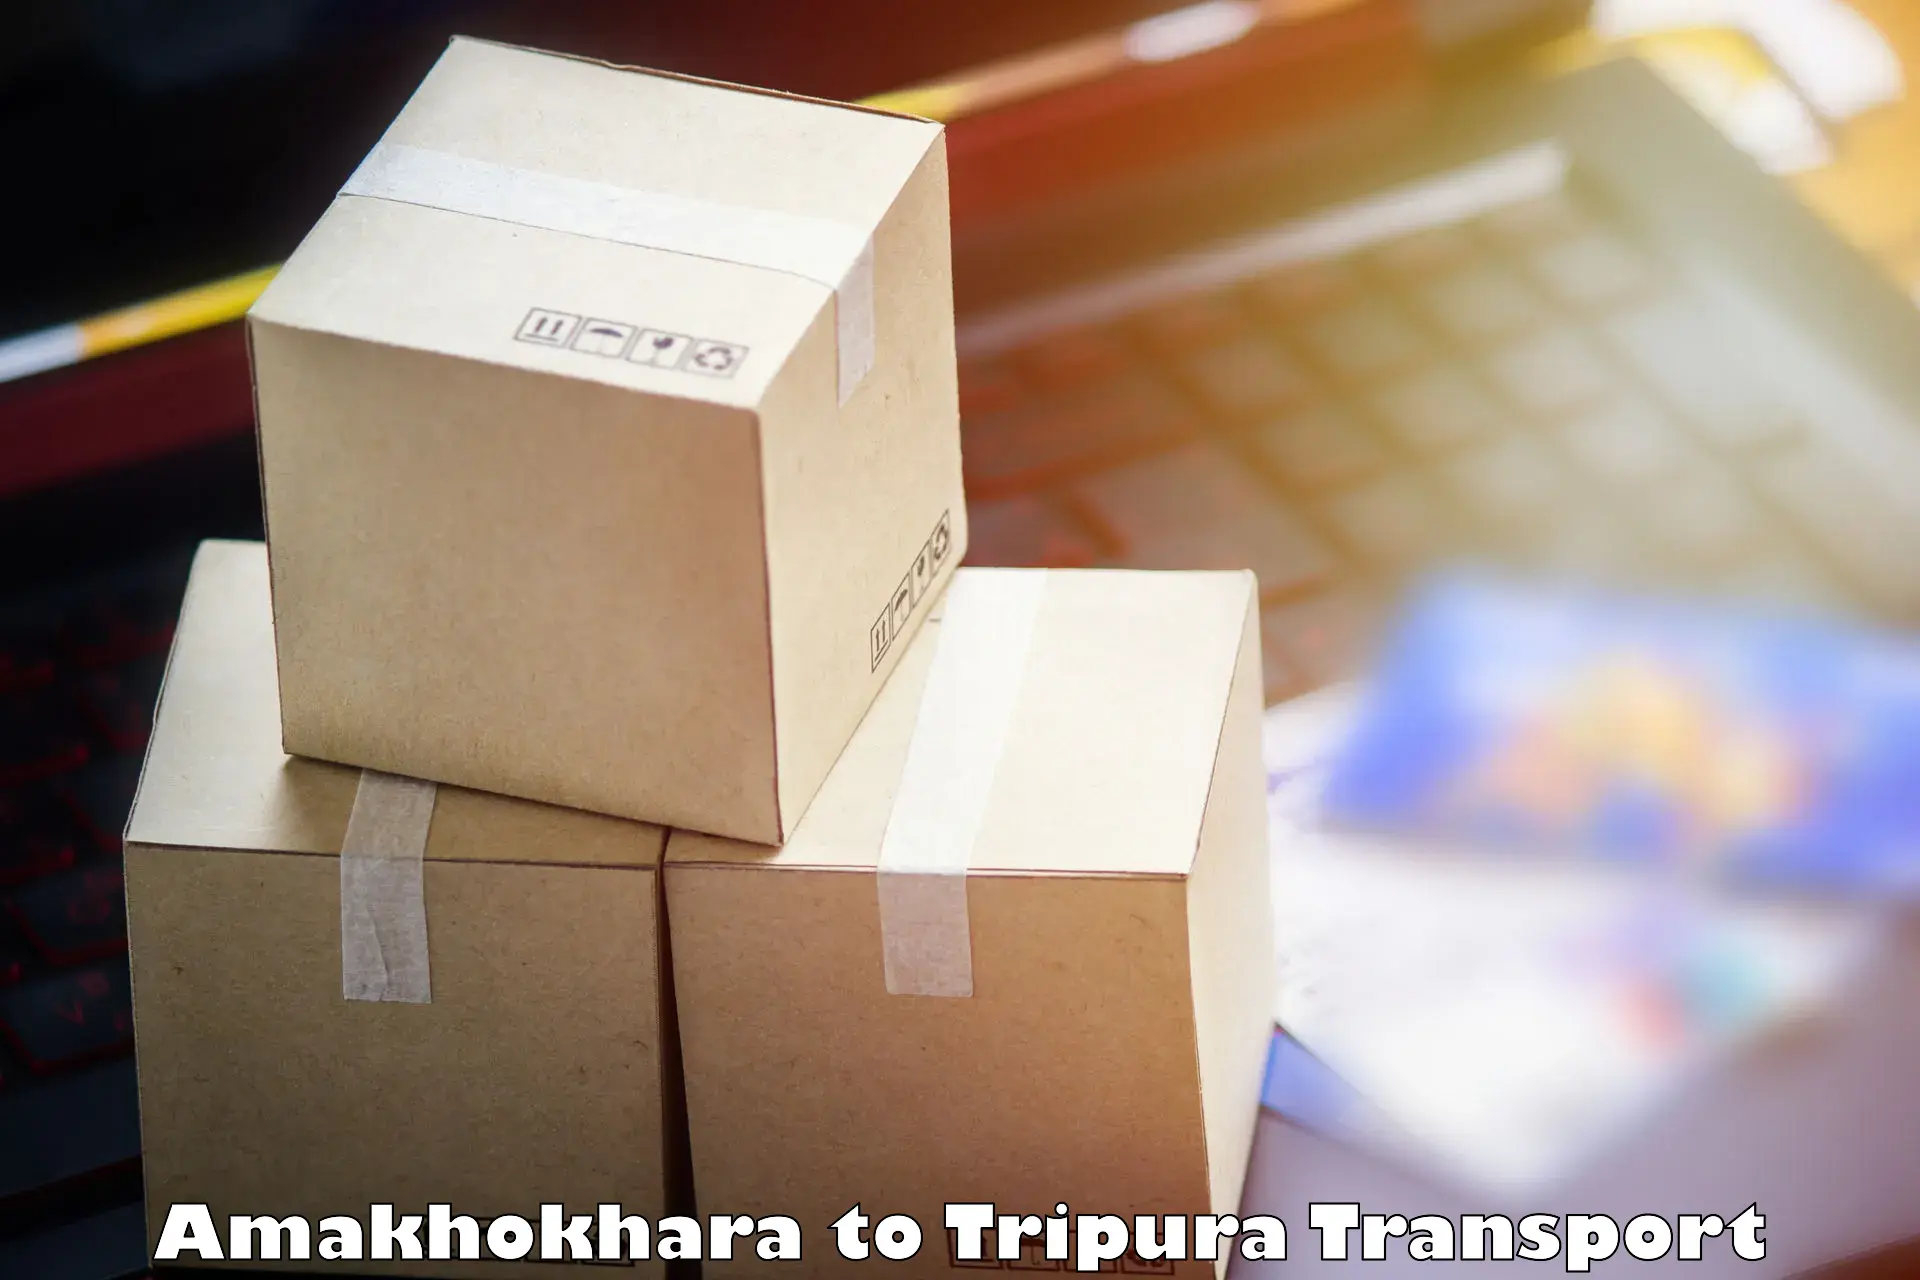 Part load transport service in India Amakhokhara to North Tripura